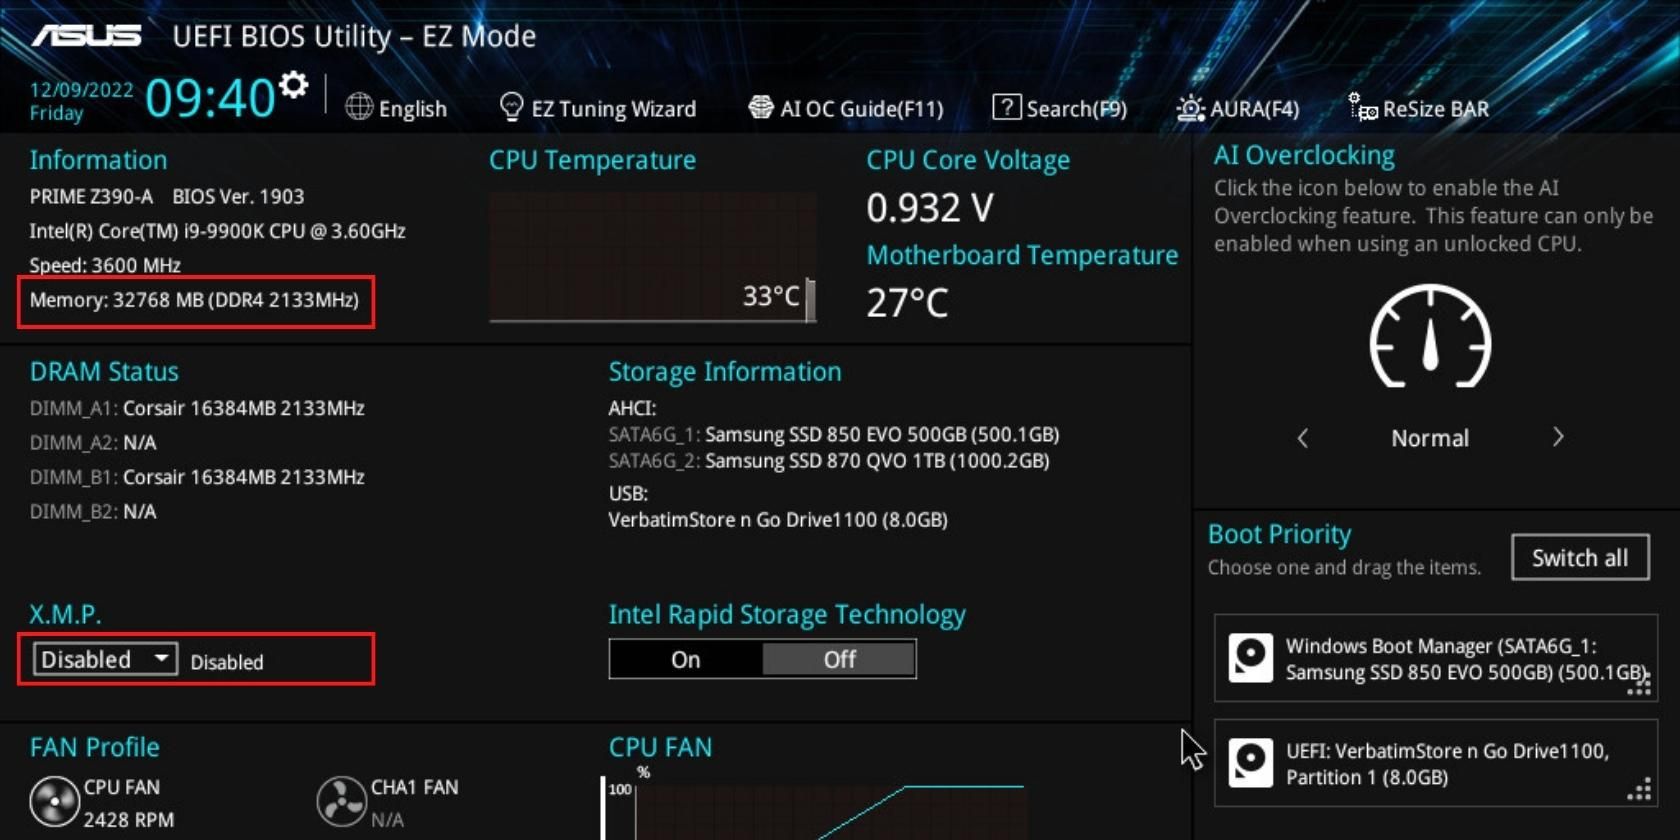 ASUS BIOS showing RAM speed with XMP disabled